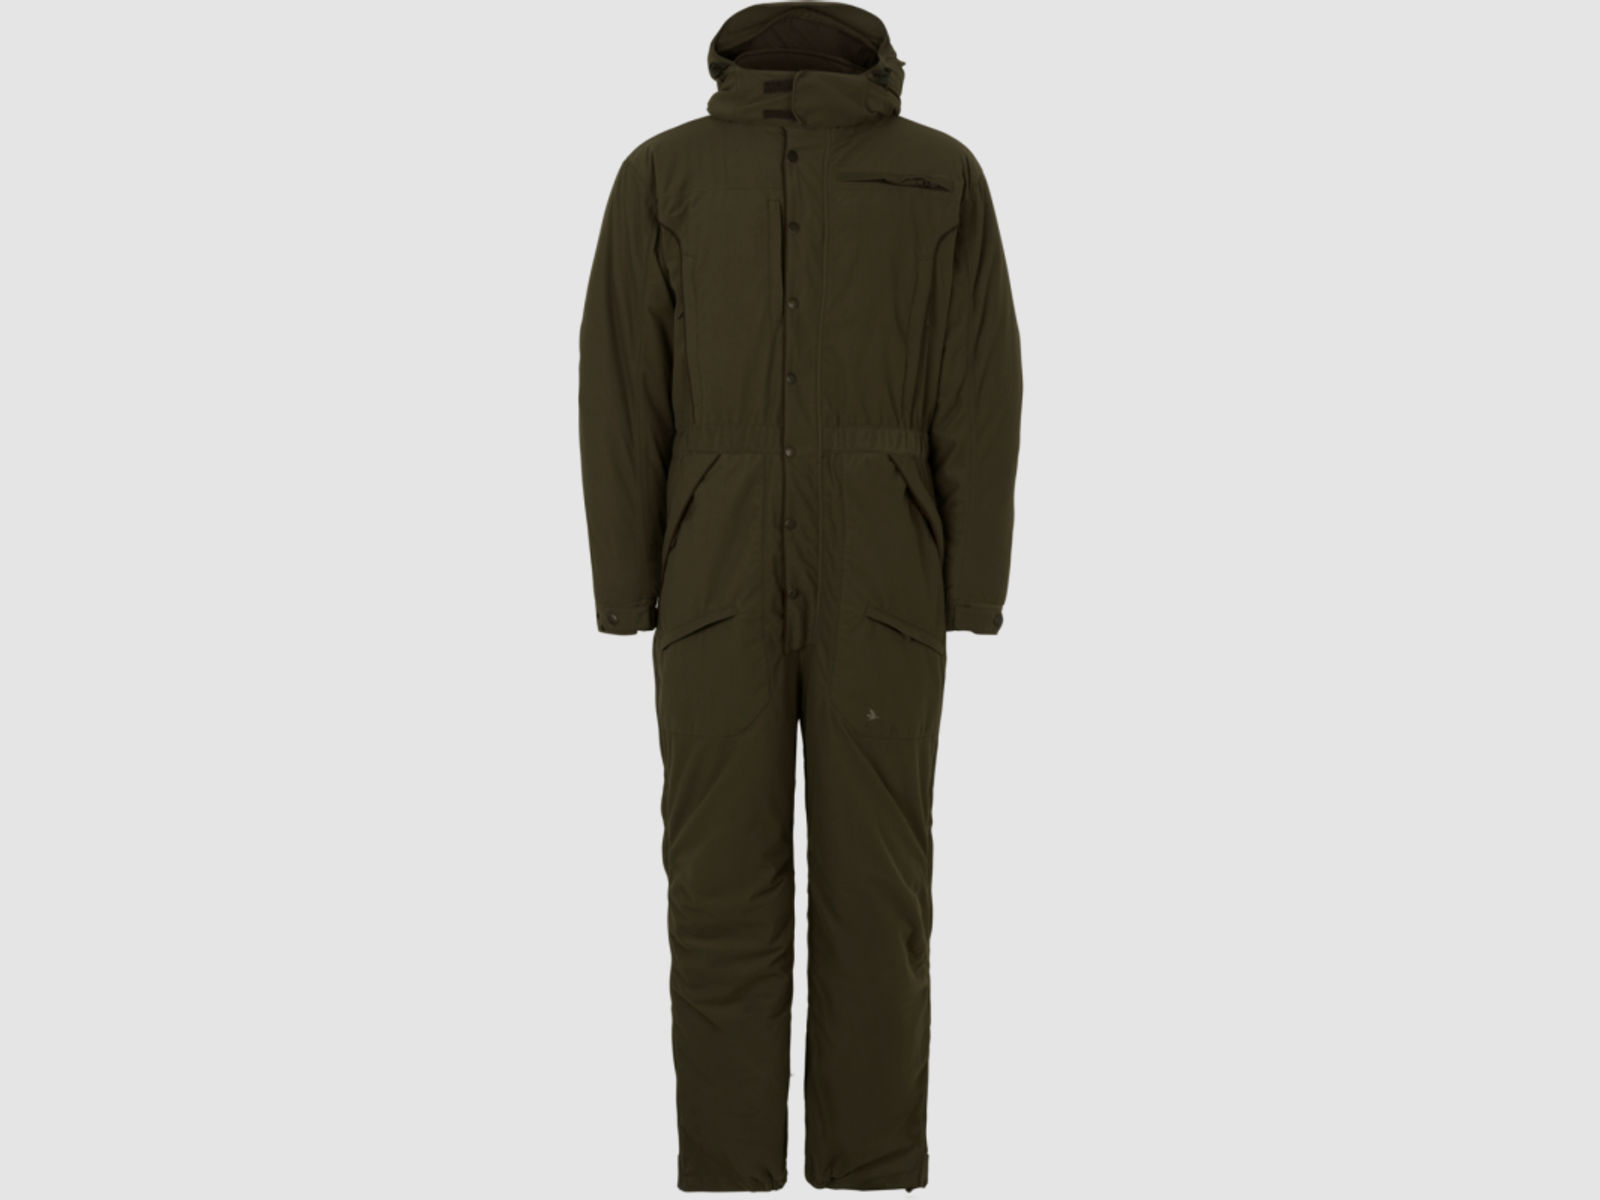 Seeland Herren Overall Outthere Pine green